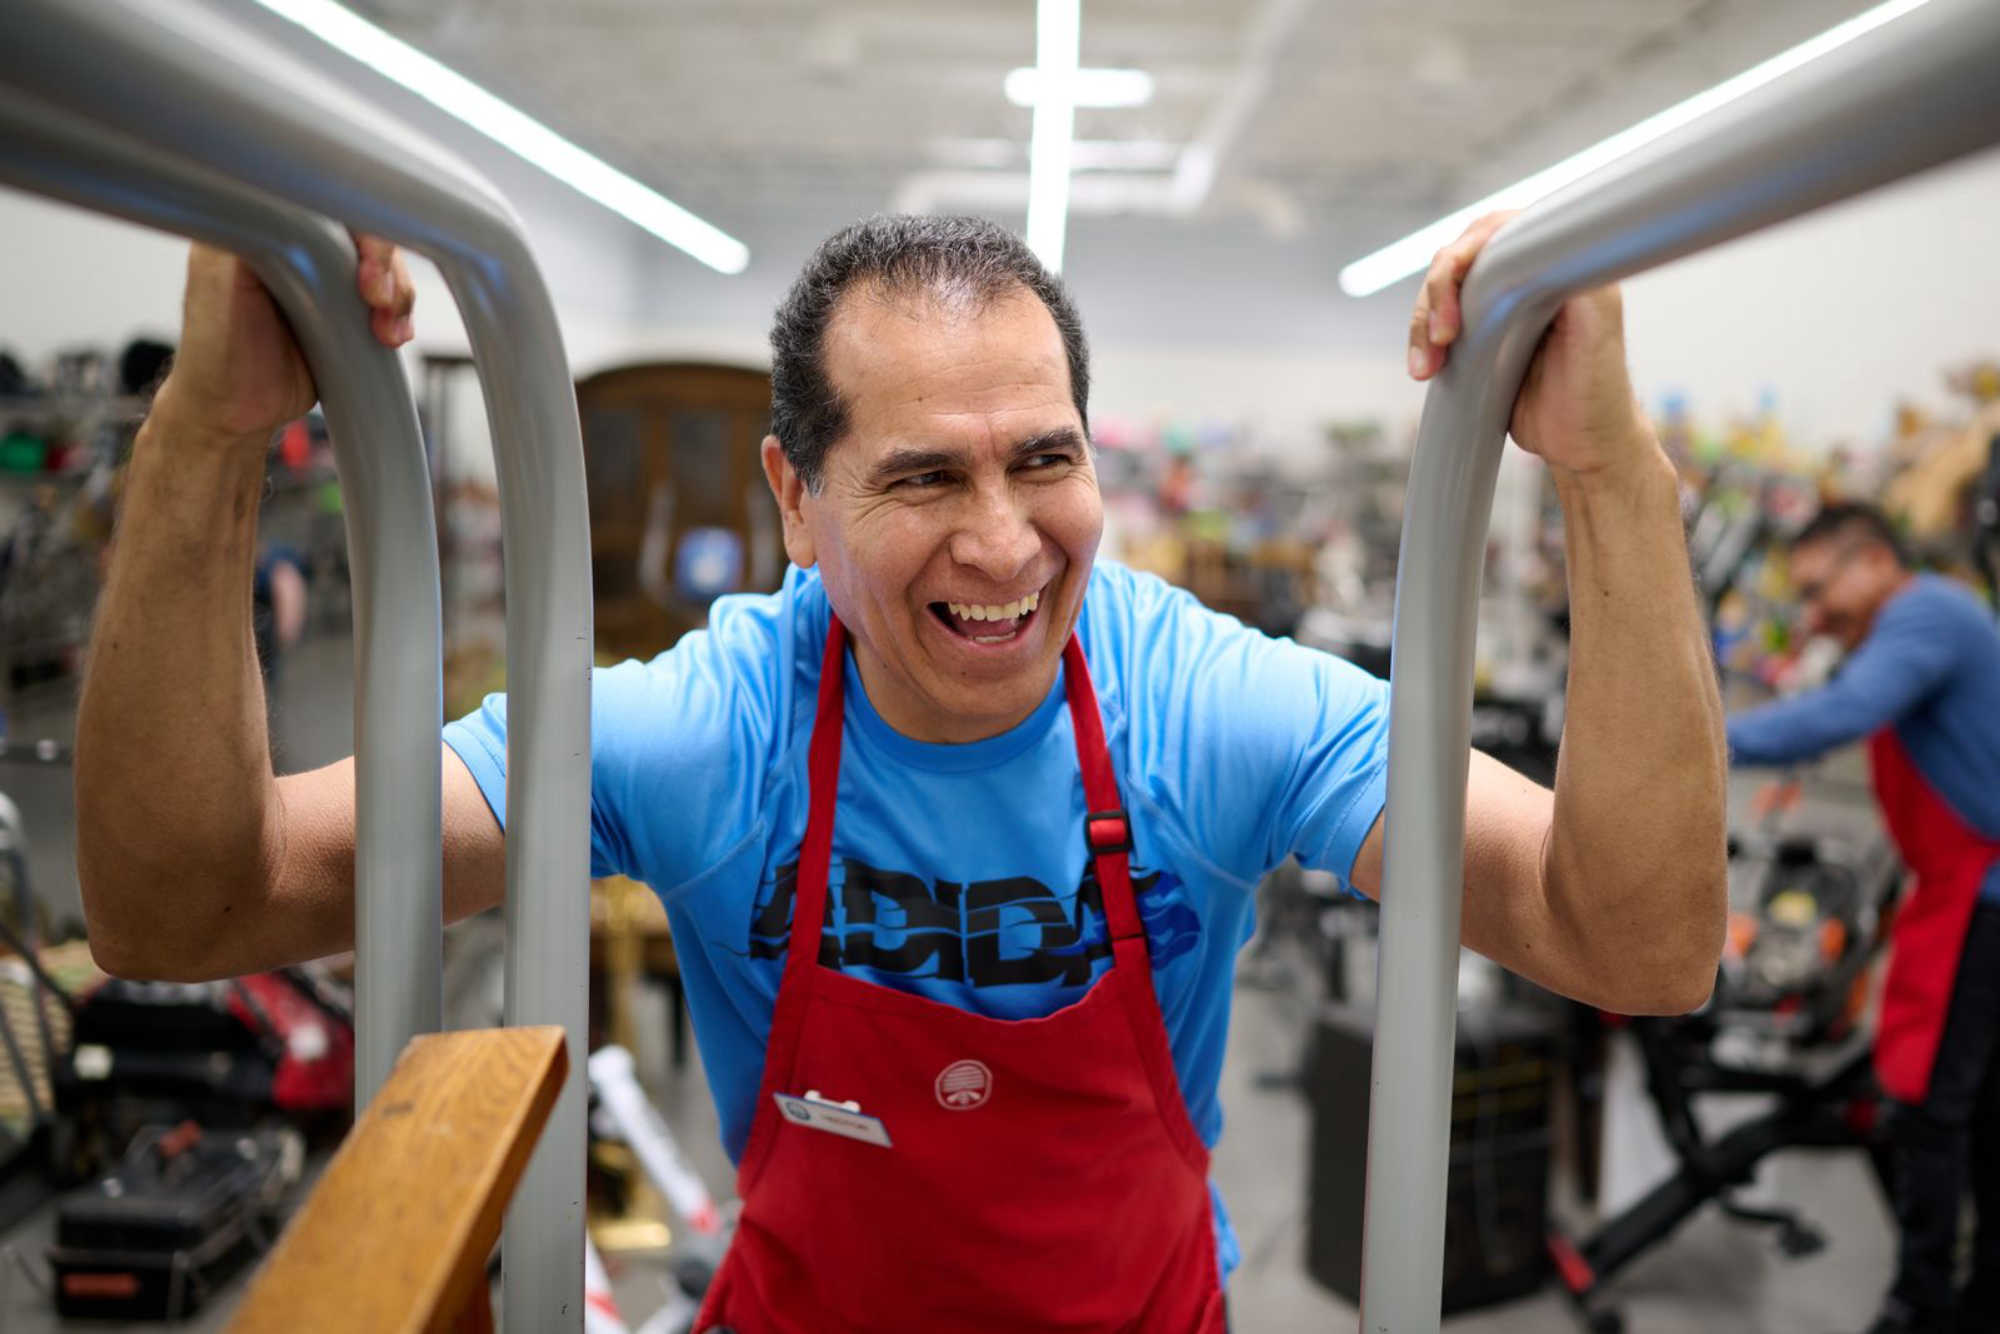 A thrift store worker smiles as he works